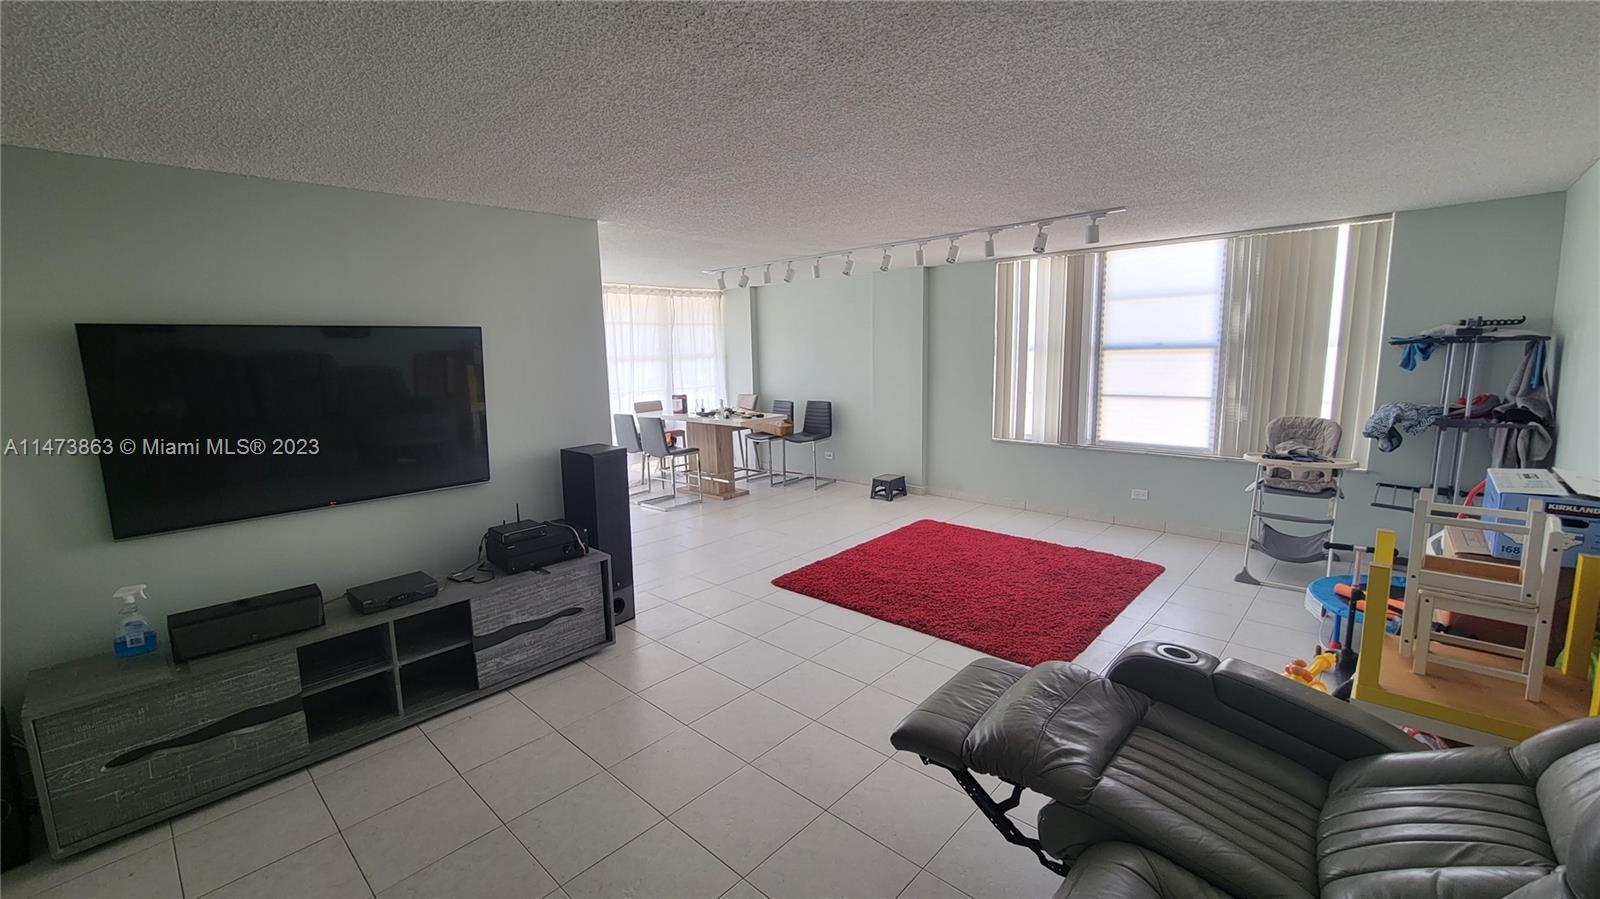 Beautiful condo right in the center of Sunny Isles Beach life. Ready to move in. Motivated seller.